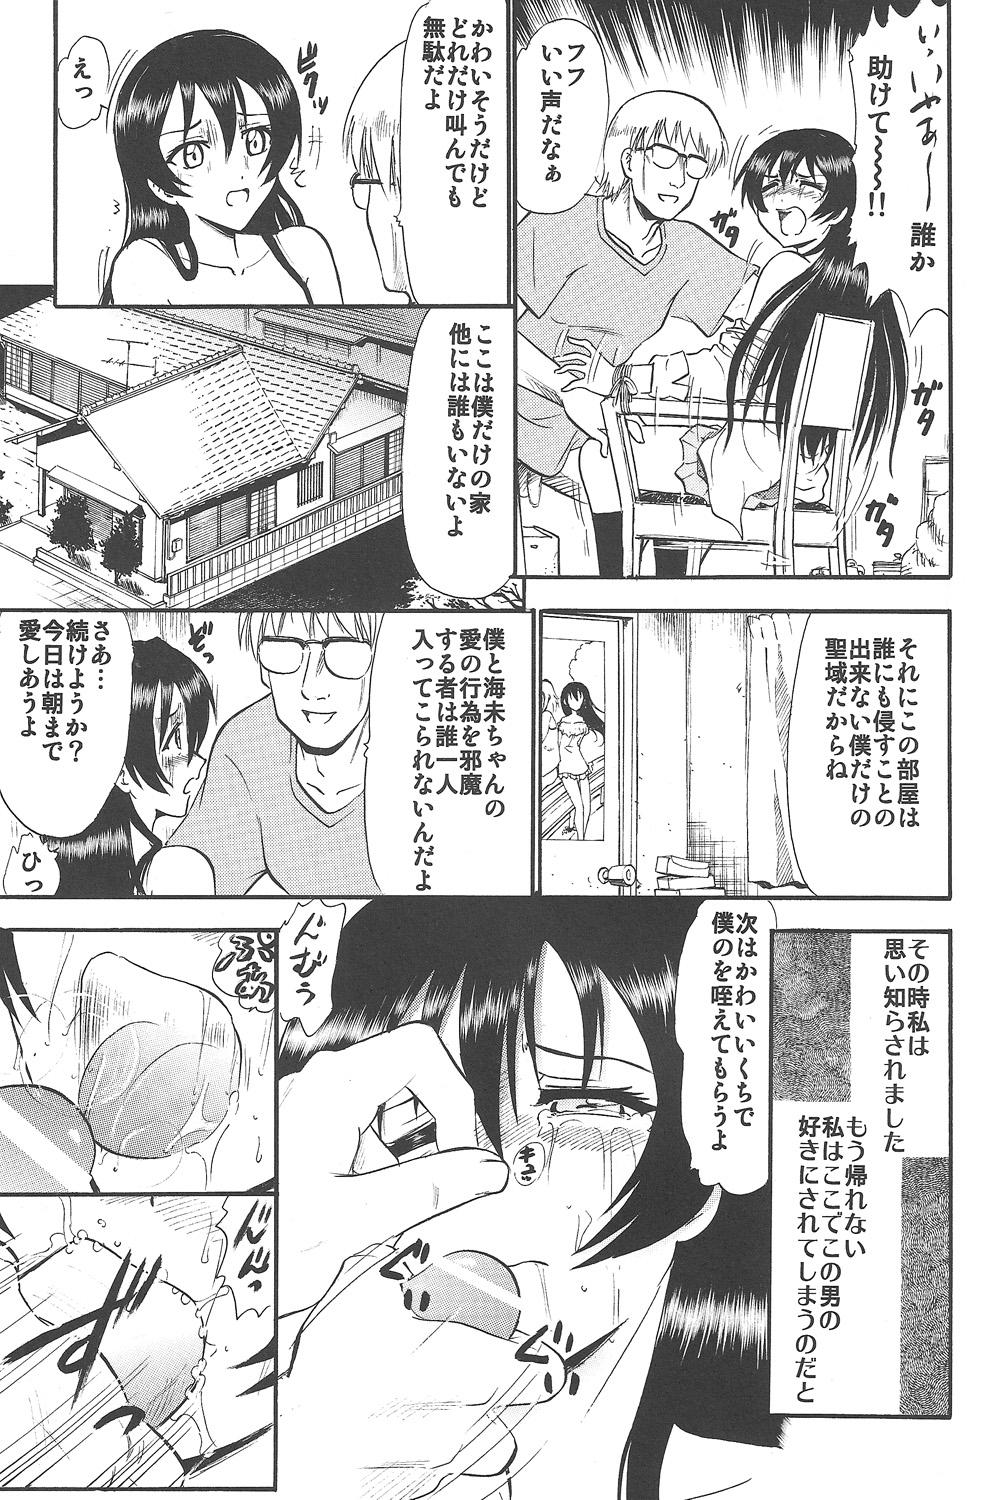 Camgirl Umi-chan Hitorijime - Love live Doctor Sex - Page 12